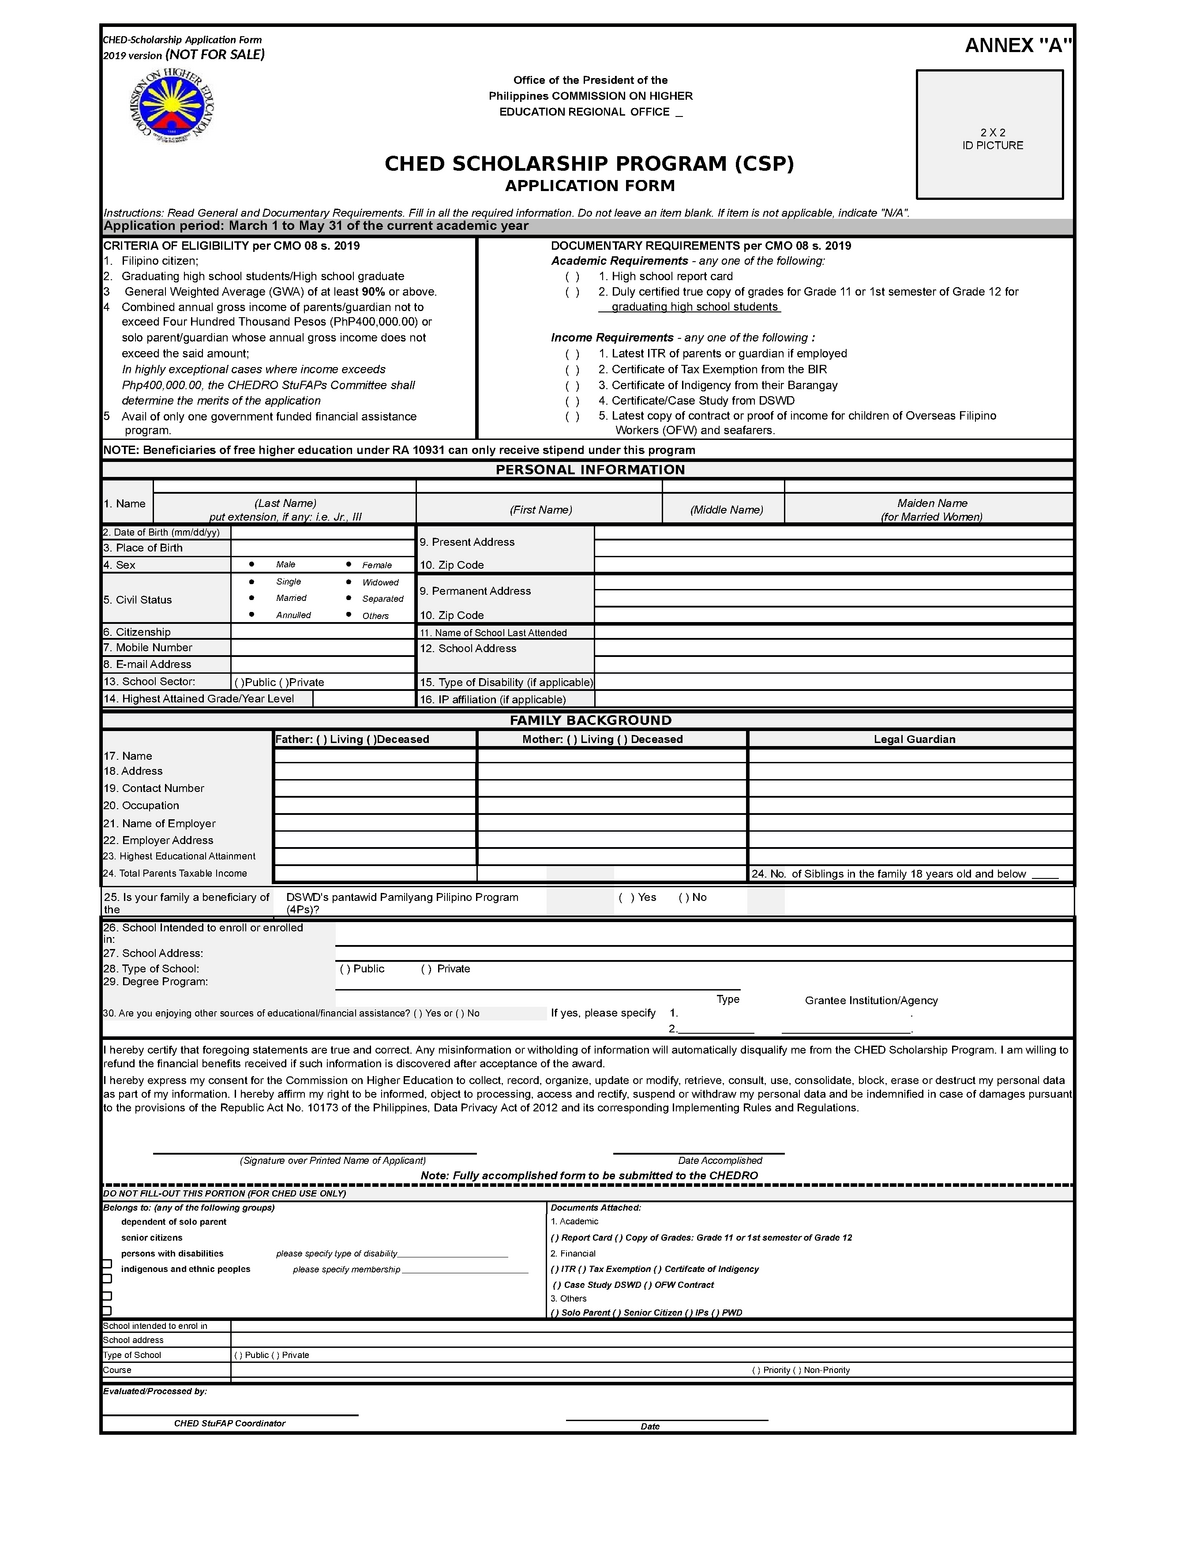 CHED Scholarship Form 2020 (1)-converted - CHED-Scholarship Application